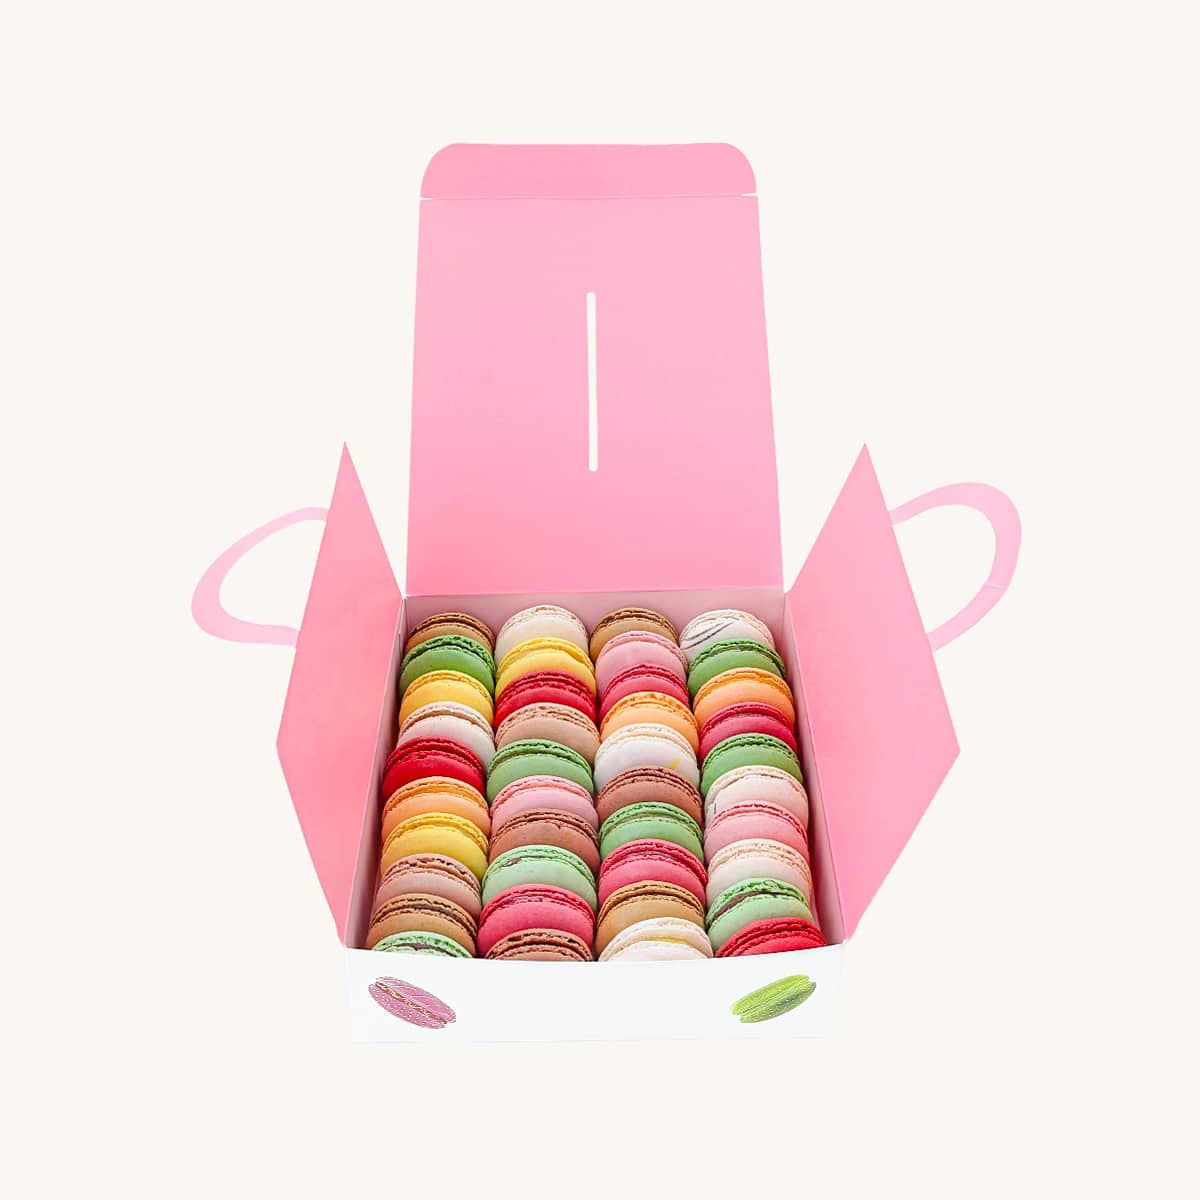 Forrey & Galland elegant gift box filled with 36 pieces of handmade premium macarons